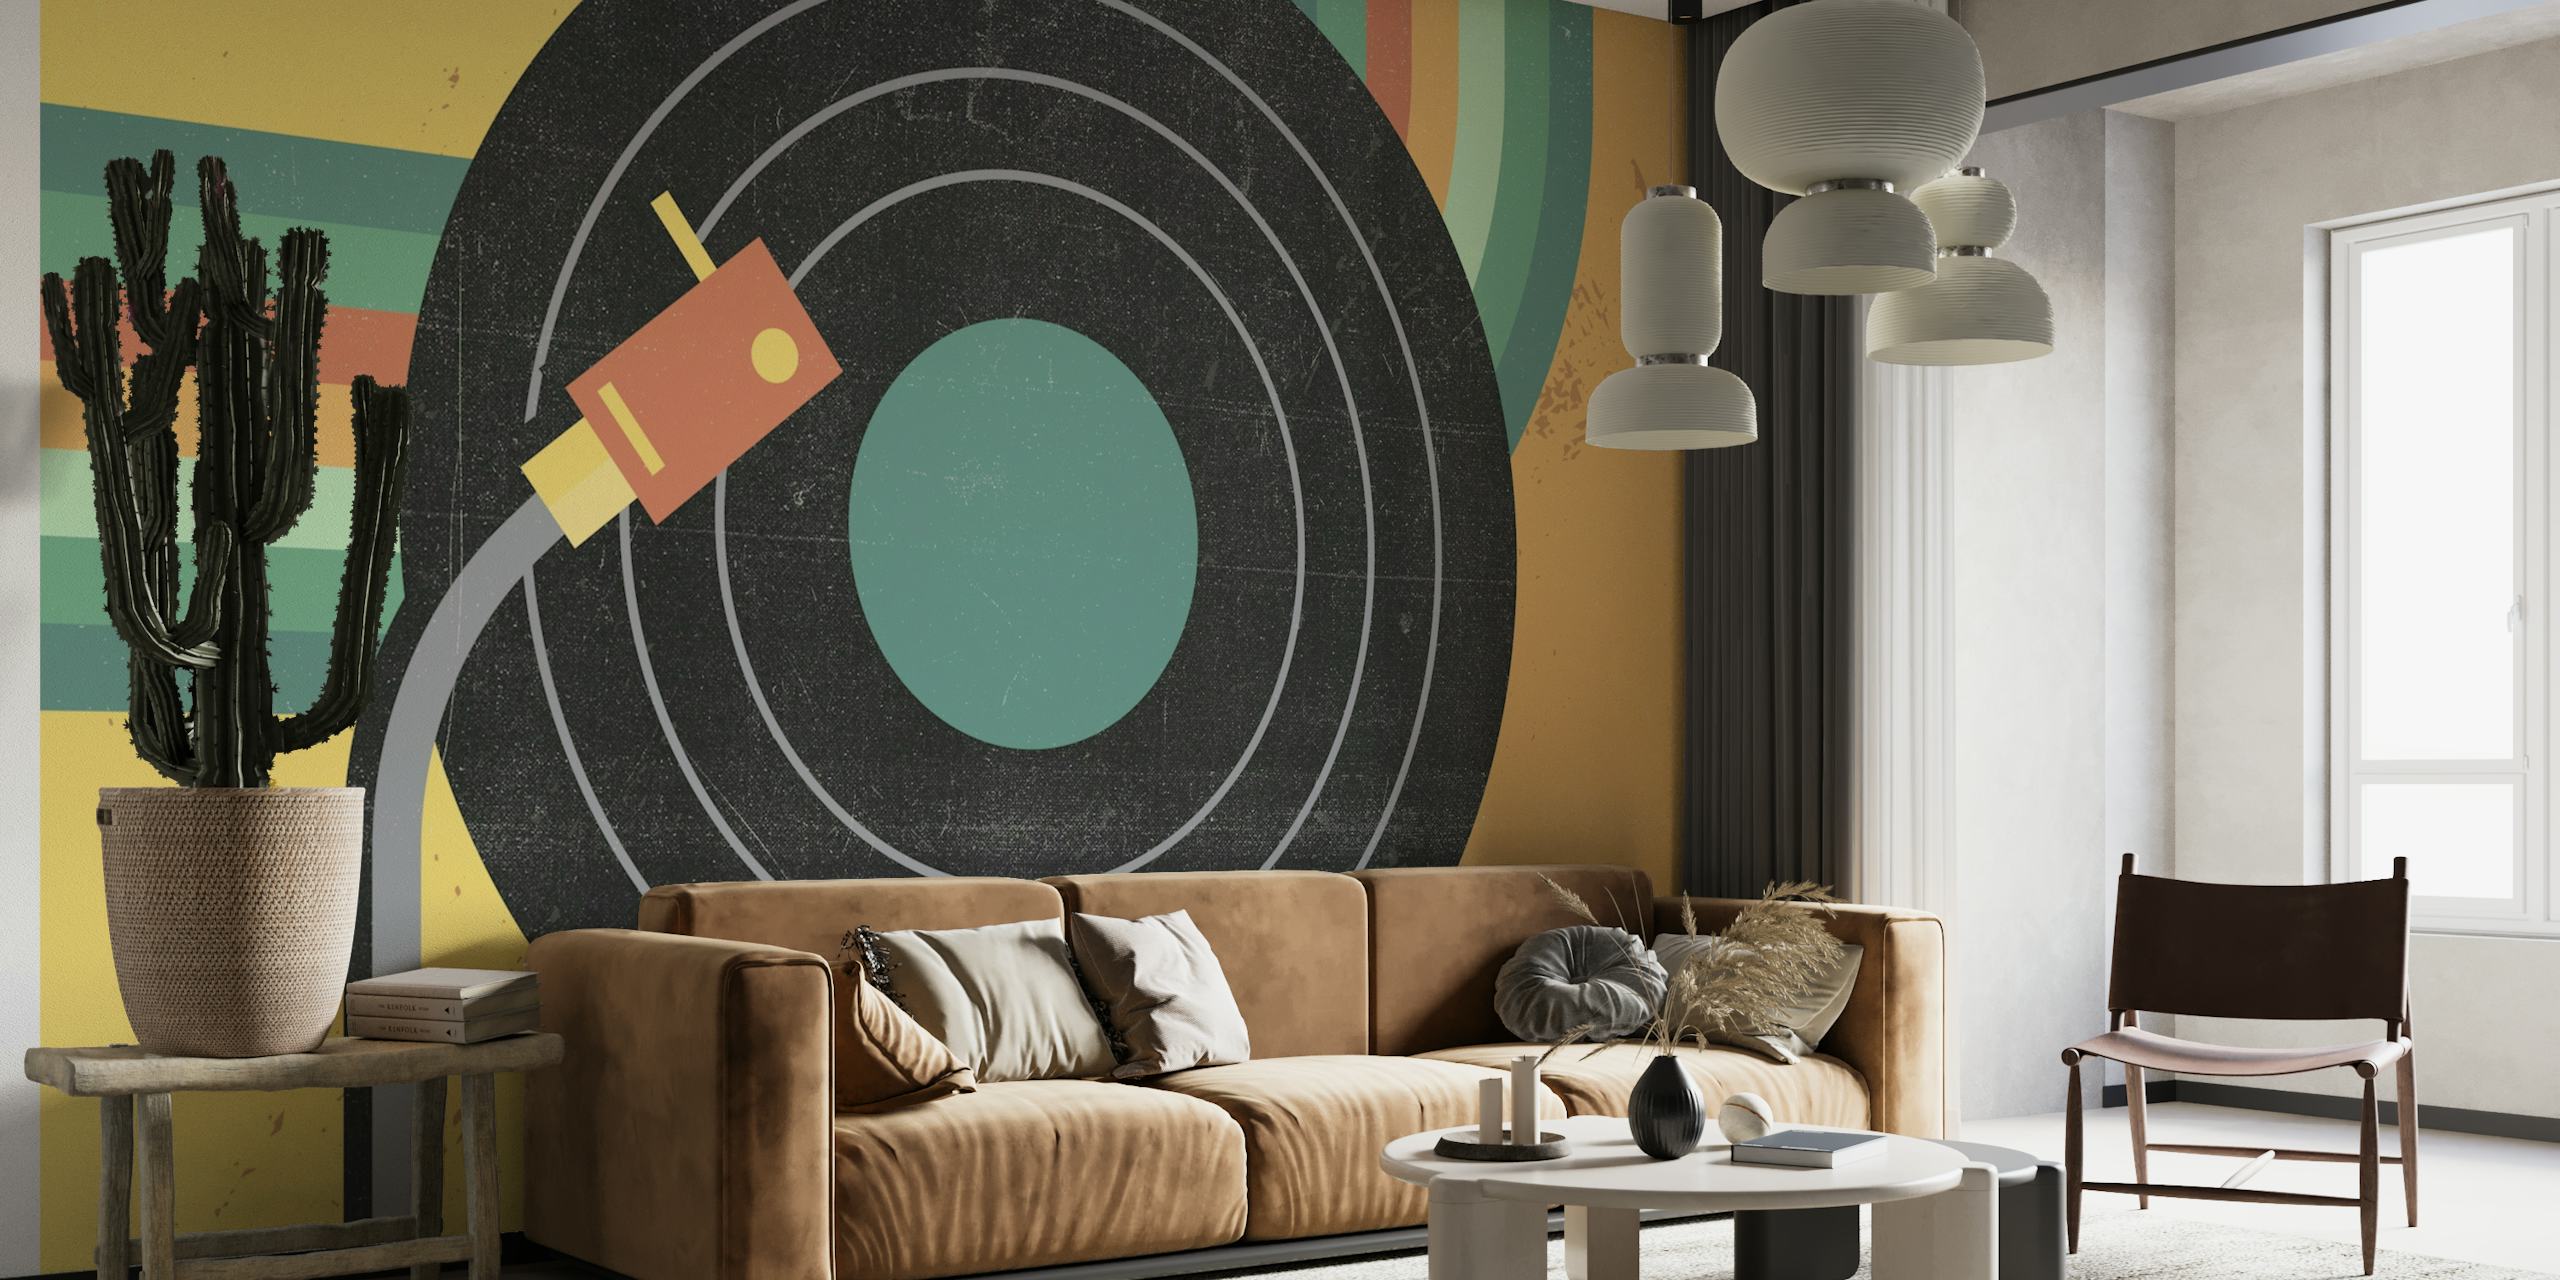 Vinyl record and turntable arm wall mural with colorful geometric background